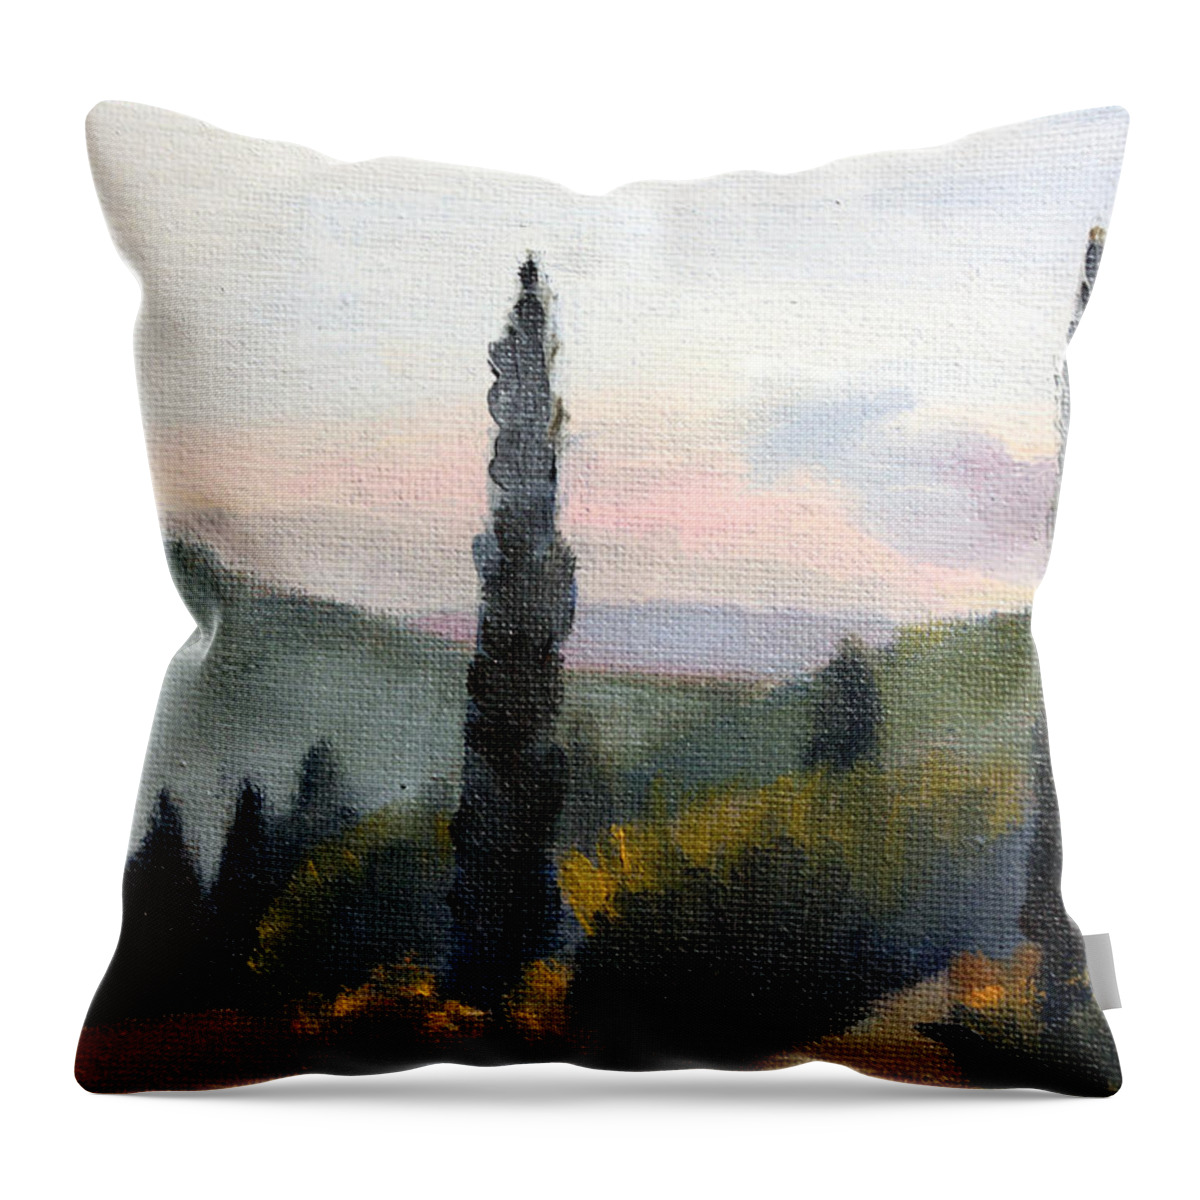 Landscape Throw Pillow featuring the painting Mountain View by Sarah Lynch